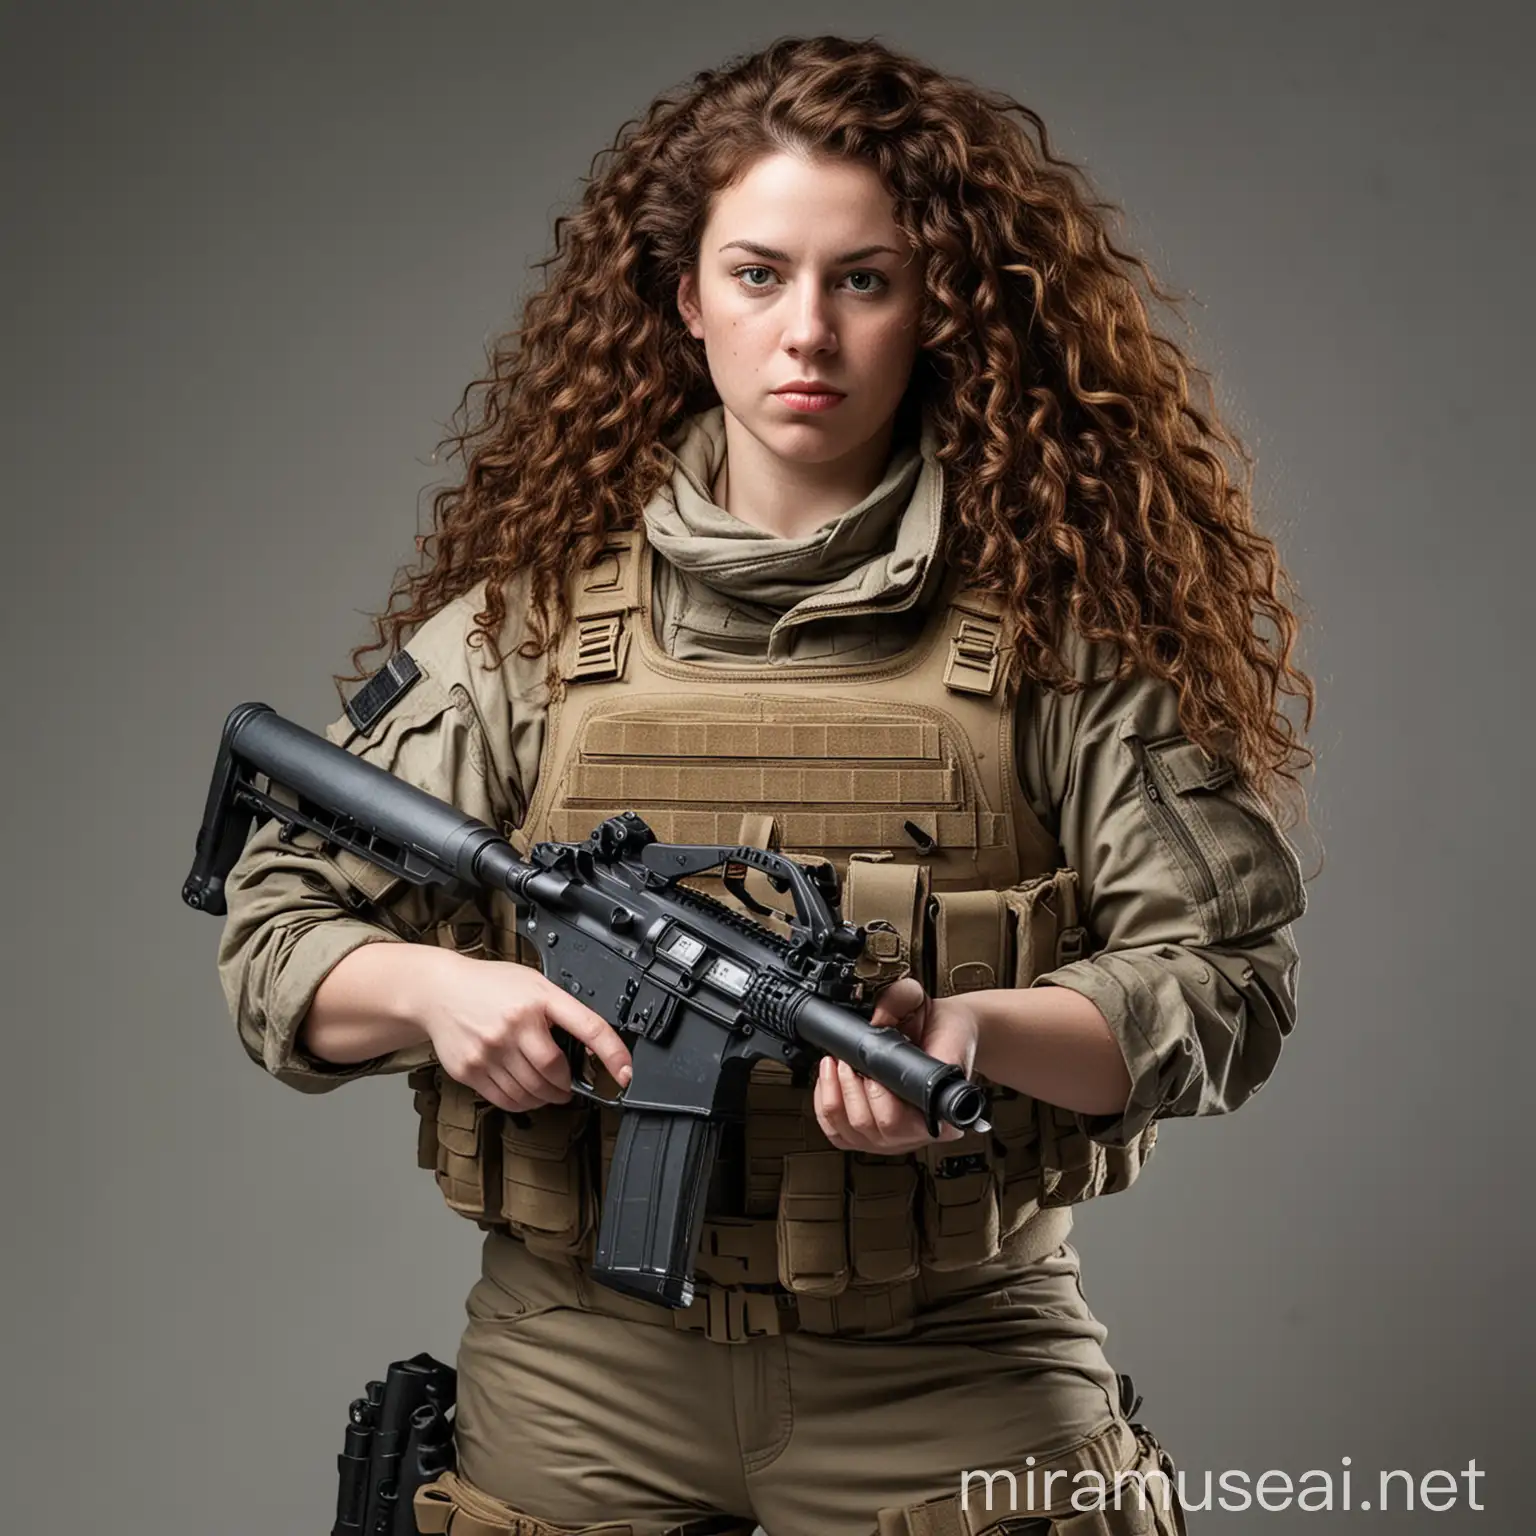 Curly Haired Woman in Tactical Gear with Assault Rifle